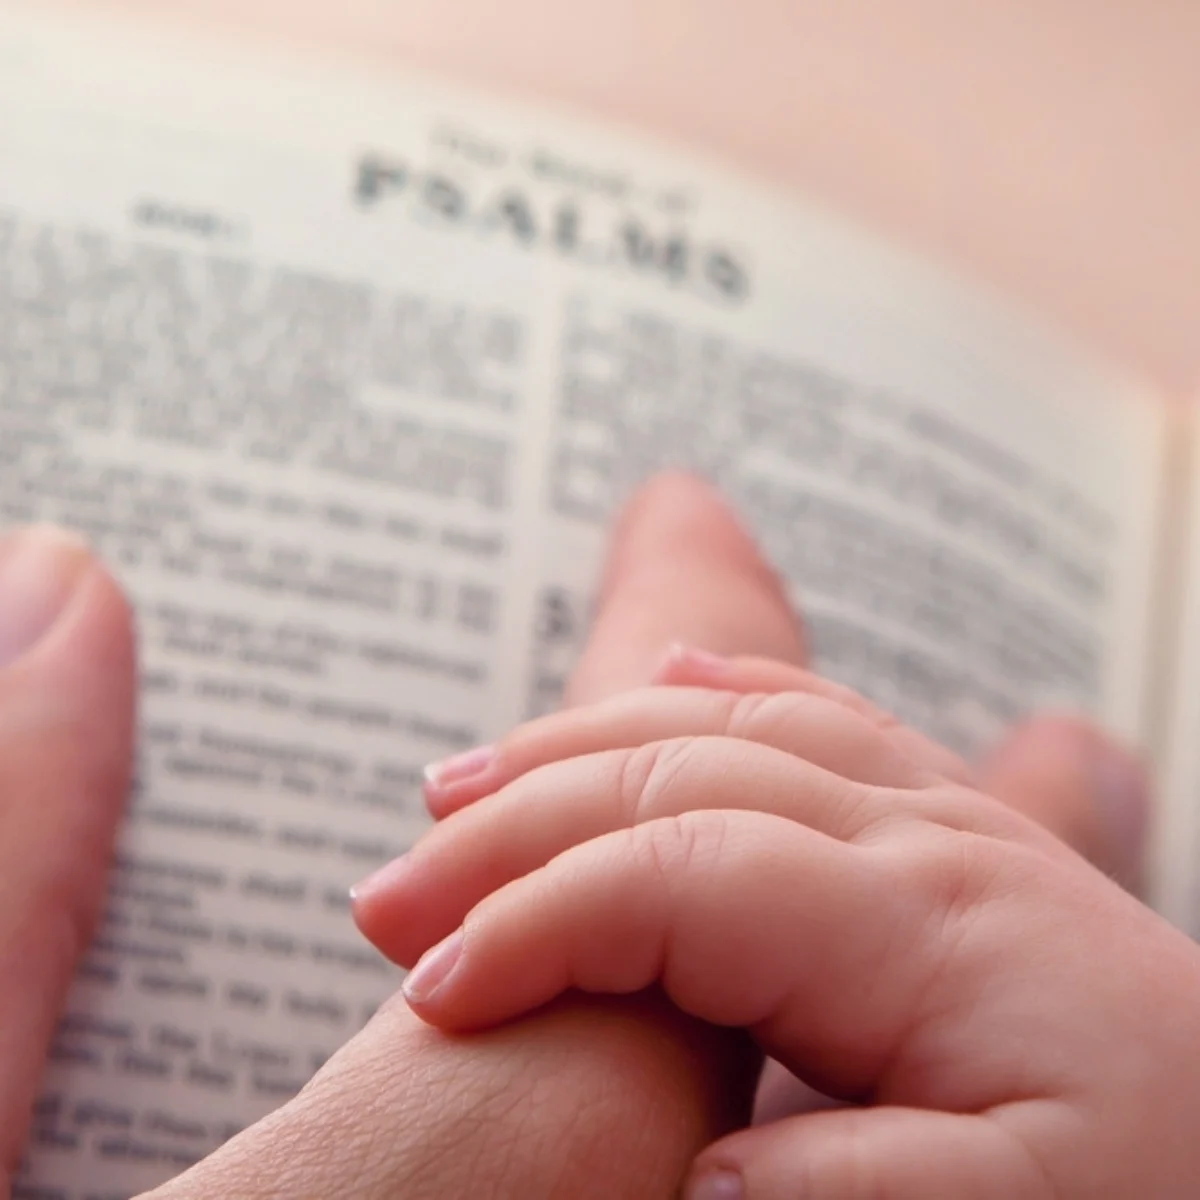 image of baby and mother's hand on Bible for the post balancing discipline and love in Christian parenting